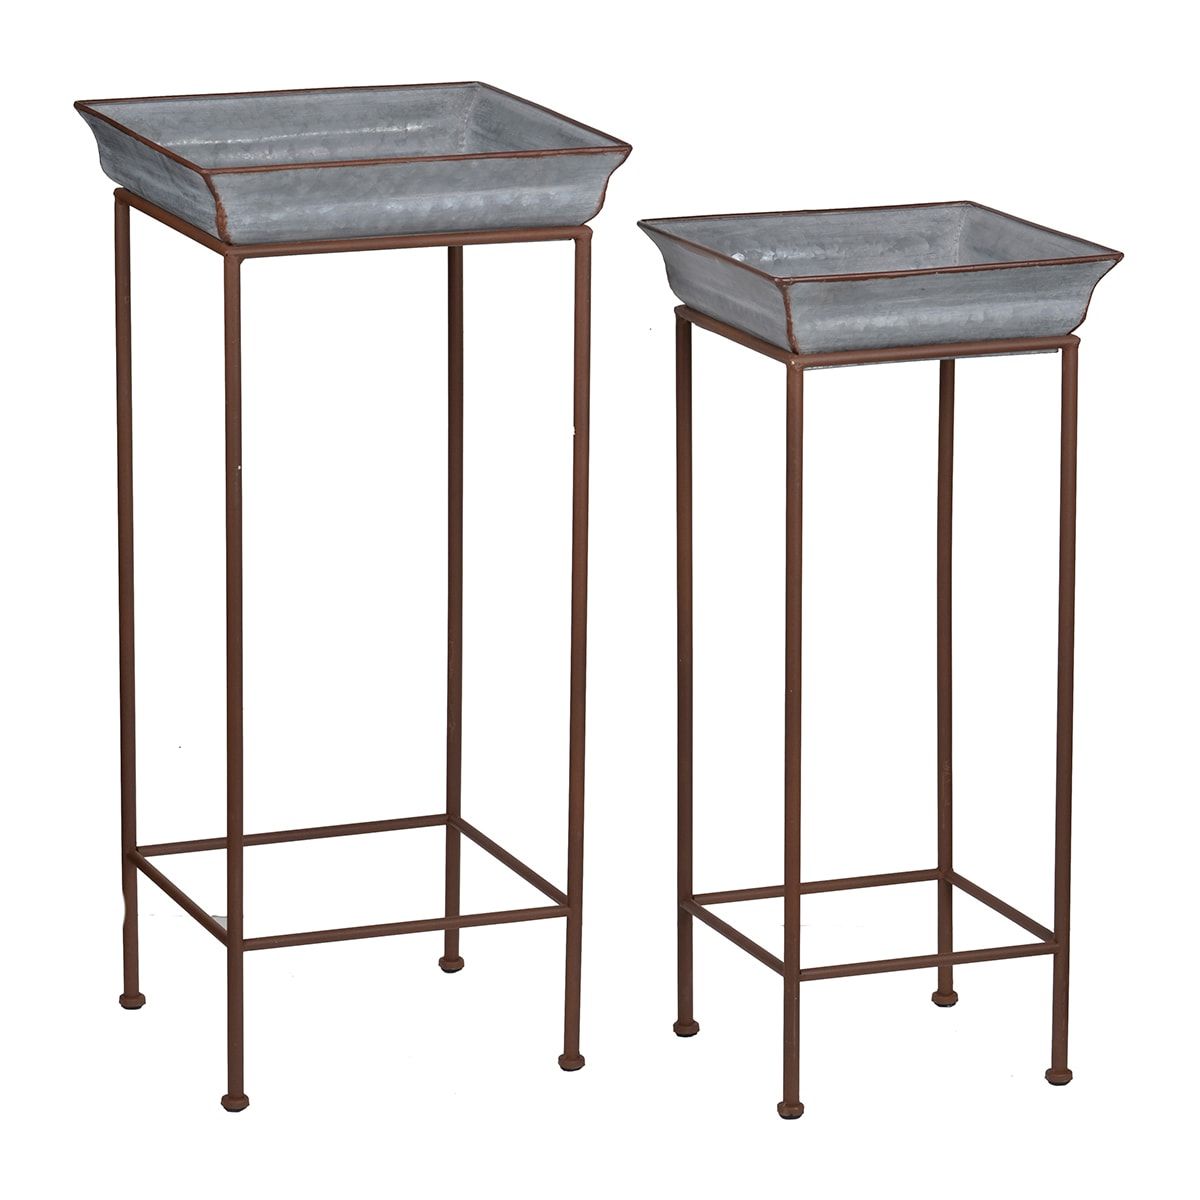 Galvanized Plant Stands With Regard To Current A&b Home Shelburne Plant Stands 30.7 In H X  (View 5 of 15)